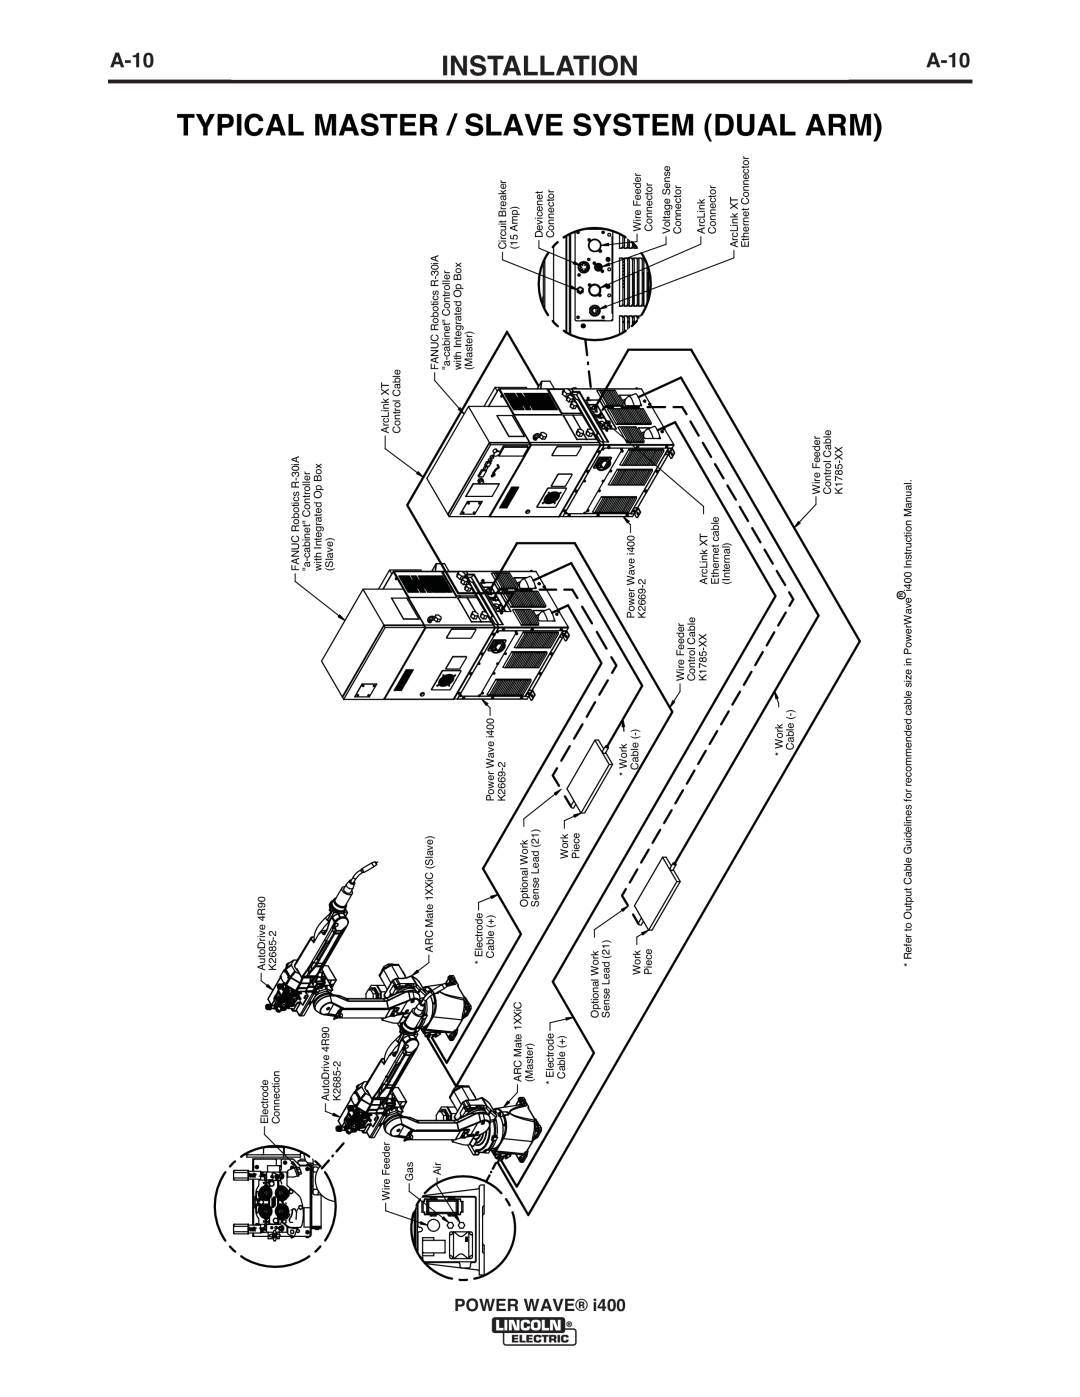 Lincoln Electric IM986 manual Typical Master / Slave System Dual Arm, A-10, Installation 